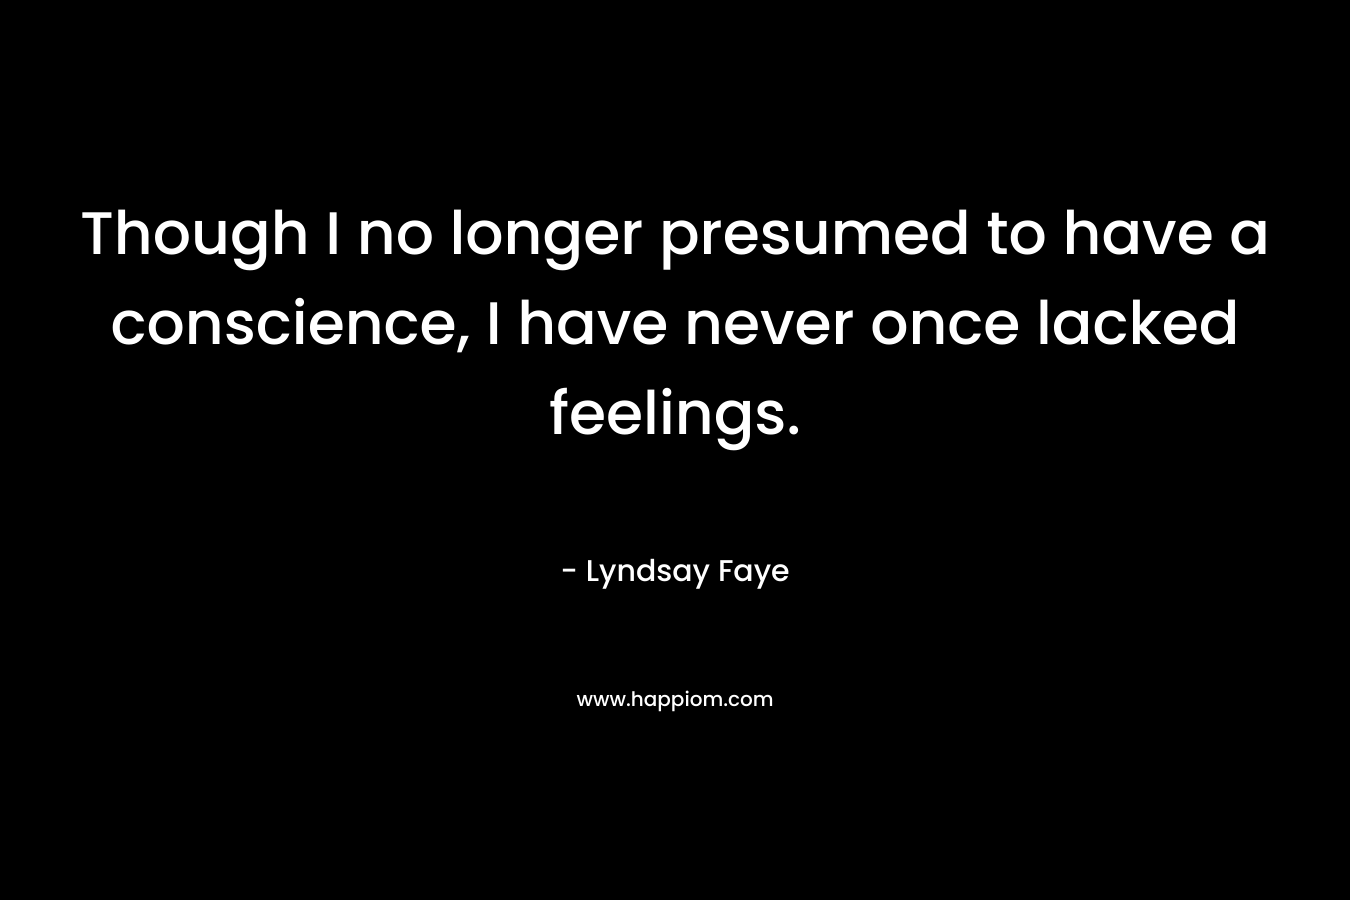 Though I no longer presumed to have a conscience, I have never once lacked feelings.